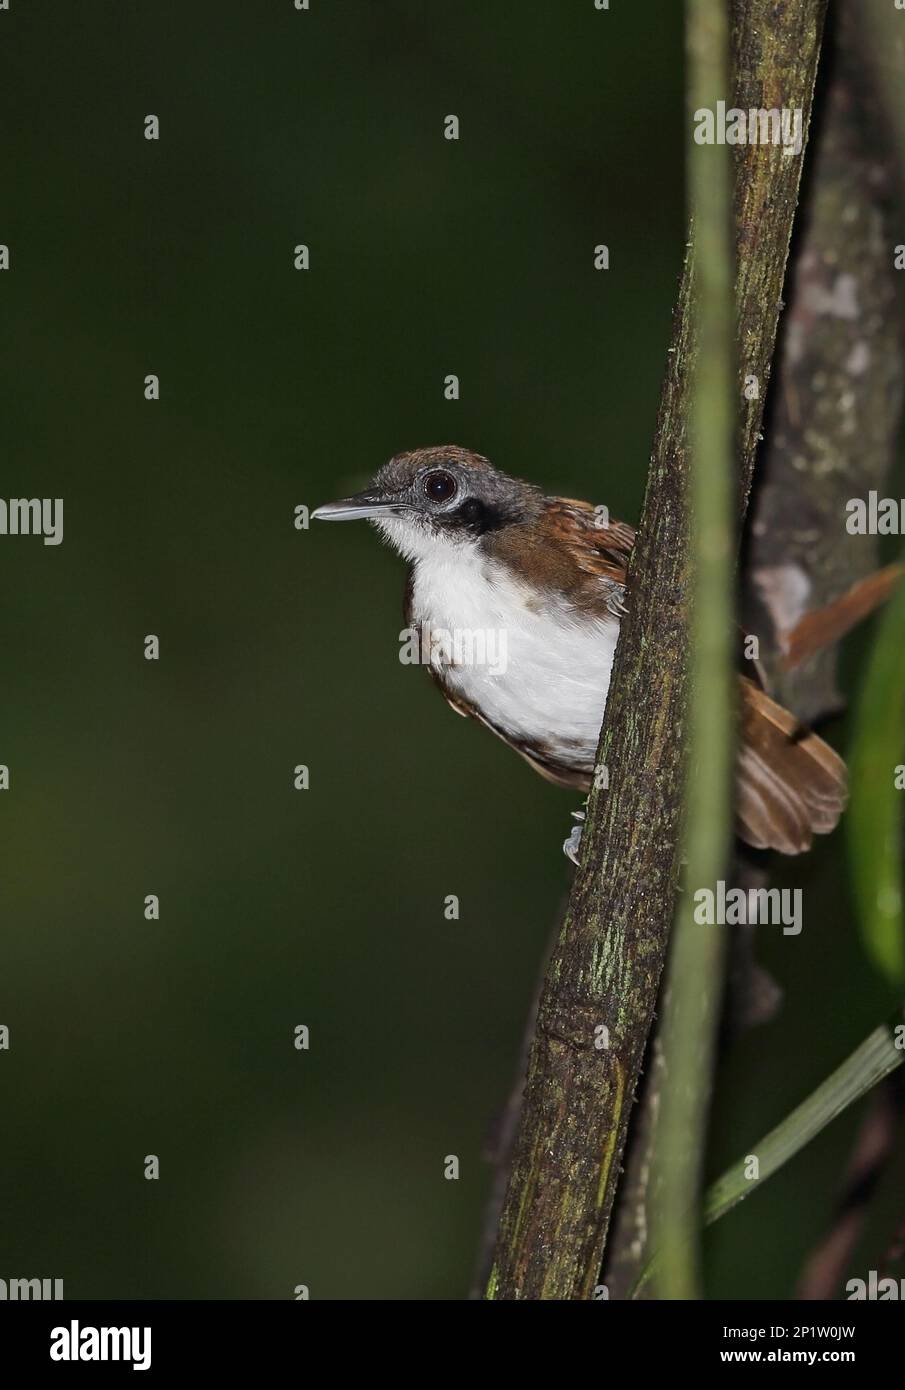 Bicoloured Antbird (Gymnopithys leucaspis bicolor) adult, perched on branch, Pipeline Road, Panama Stock Photo